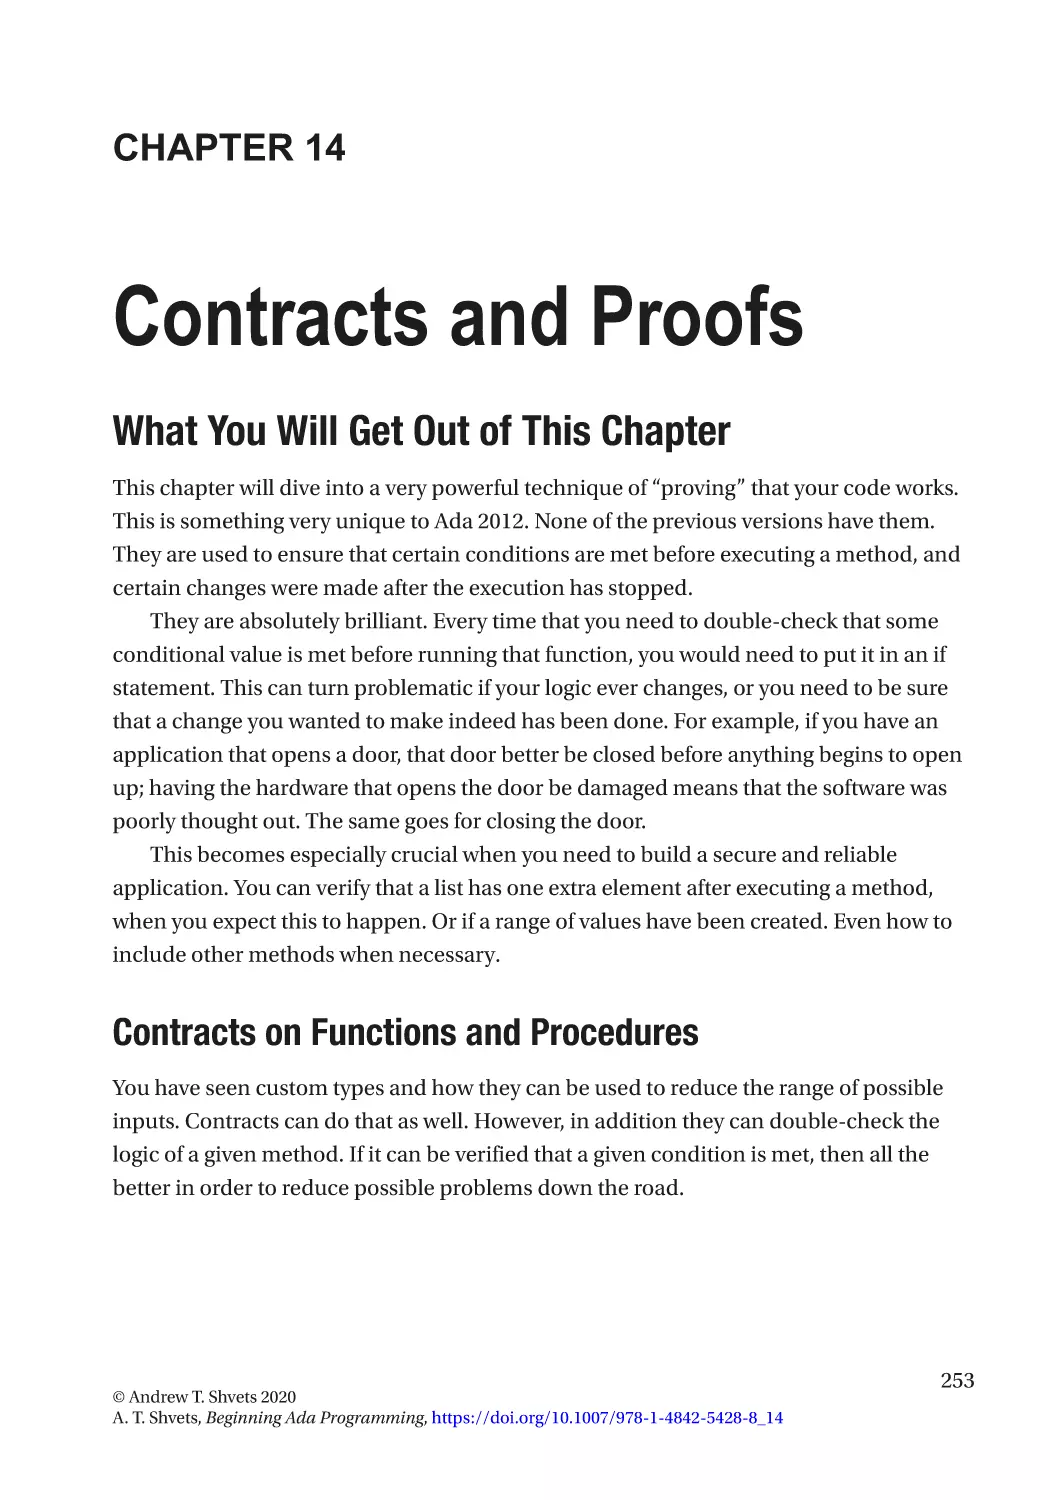 Chapter 14
What You Will Get Out of This Chapter
Contracts on Functions and Procedures